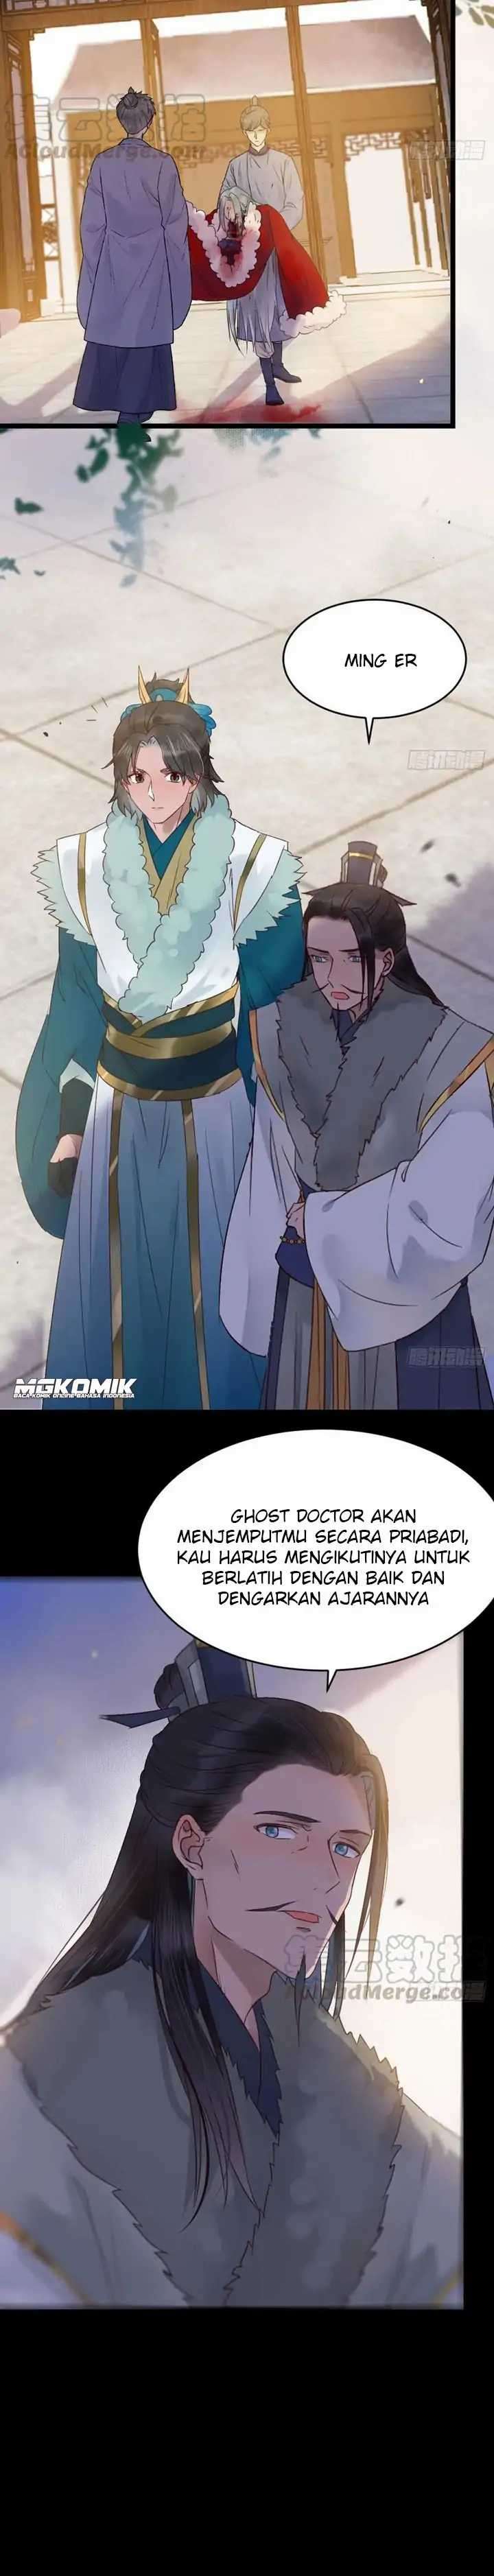 The Ghostly Doctor Chapter 376